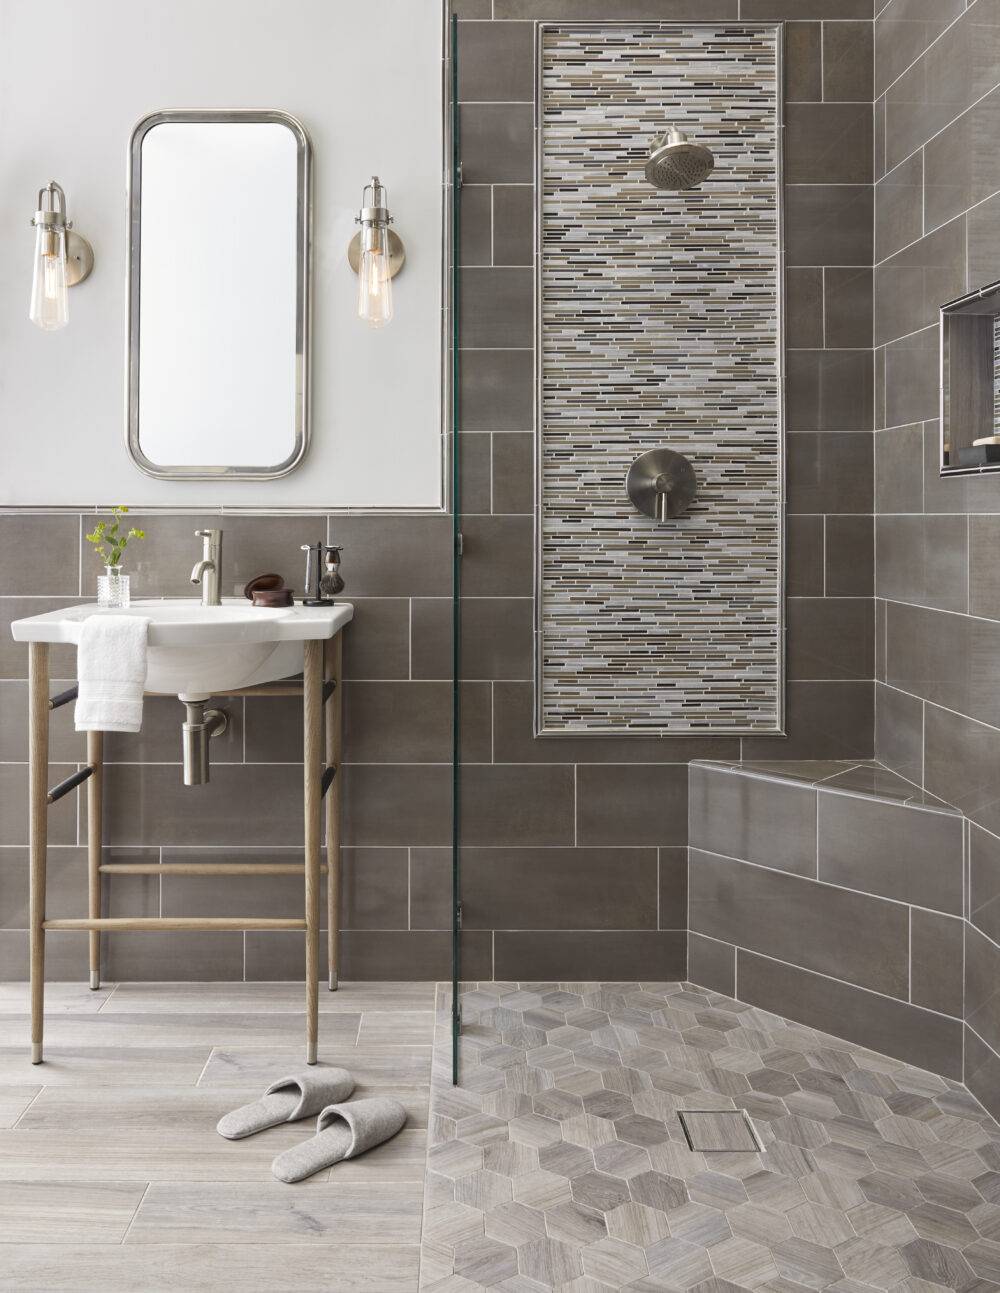 Bathroom tiled in warm tones.  Floor is wood look tile both rectangle and hexagonal shapes. Wall tile is horizontal staggered rectangles and deco frame is a metal and glass mosaic framed in metal pencil tiles.